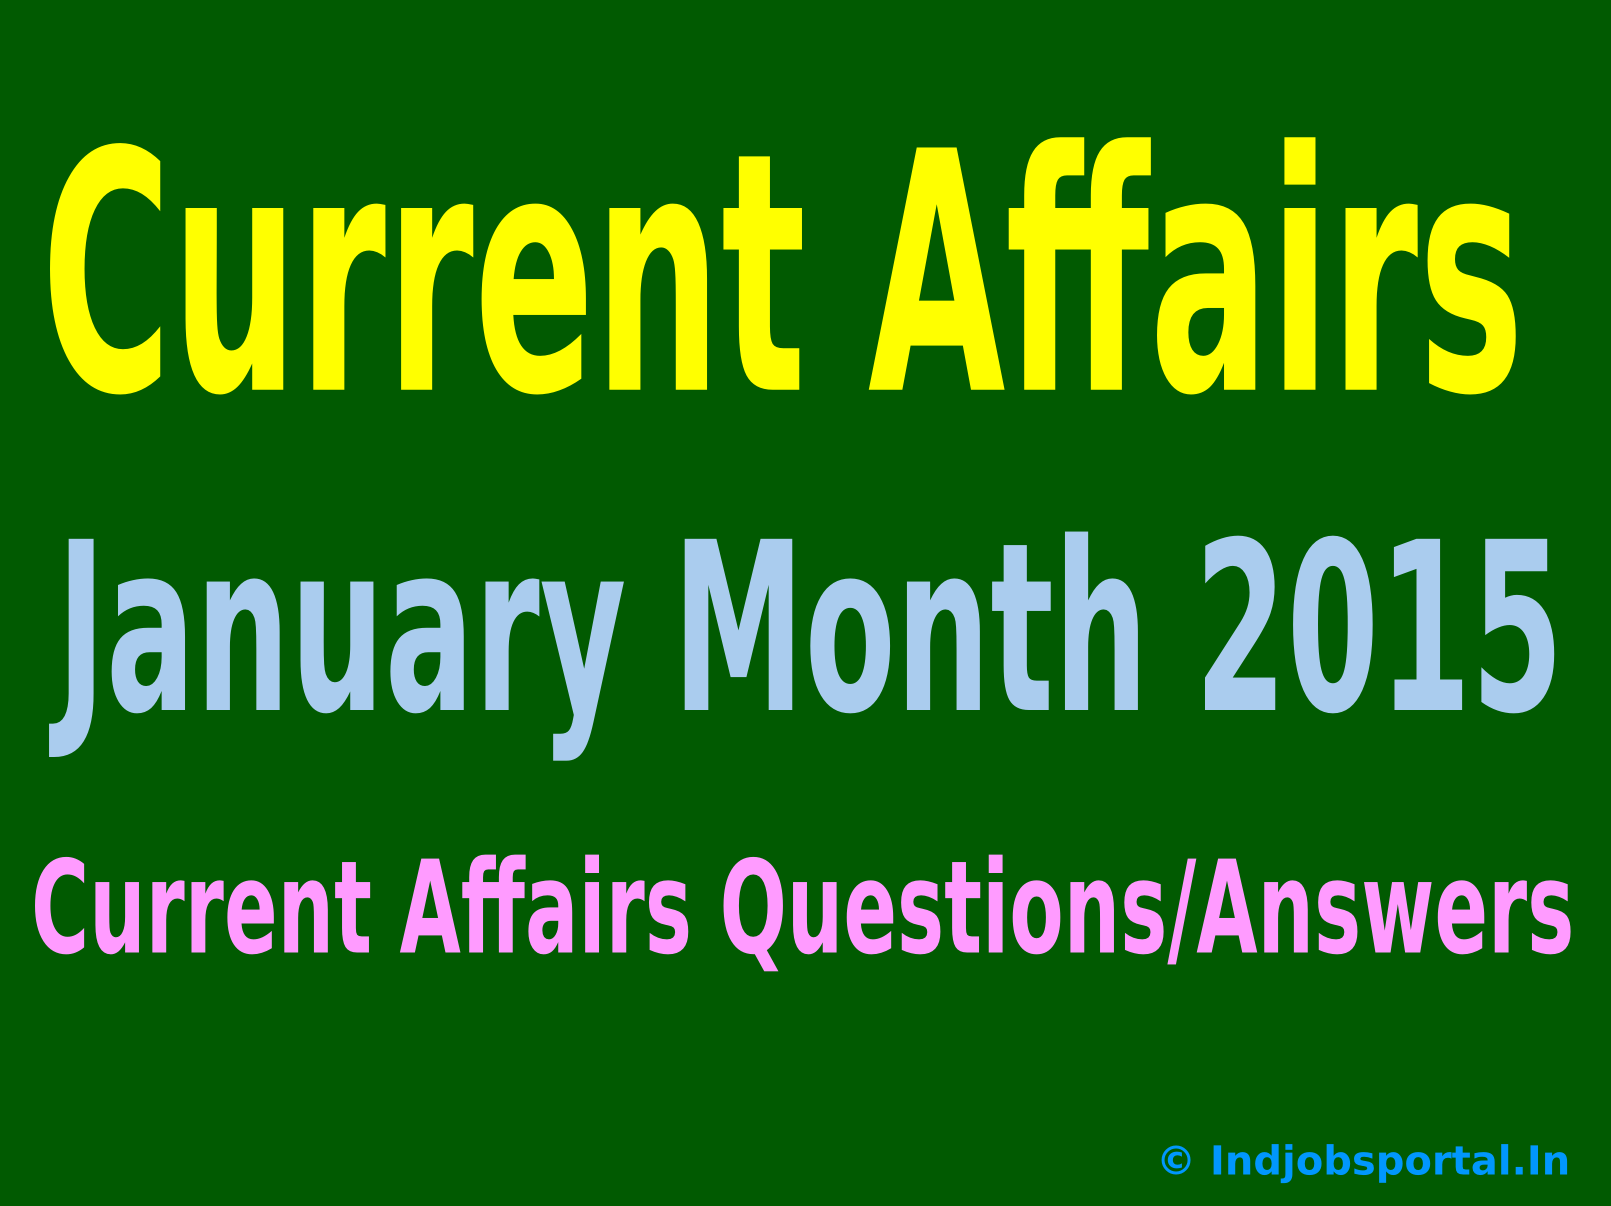 Rundown Of Some Current Affairs Questions, January Month 2015